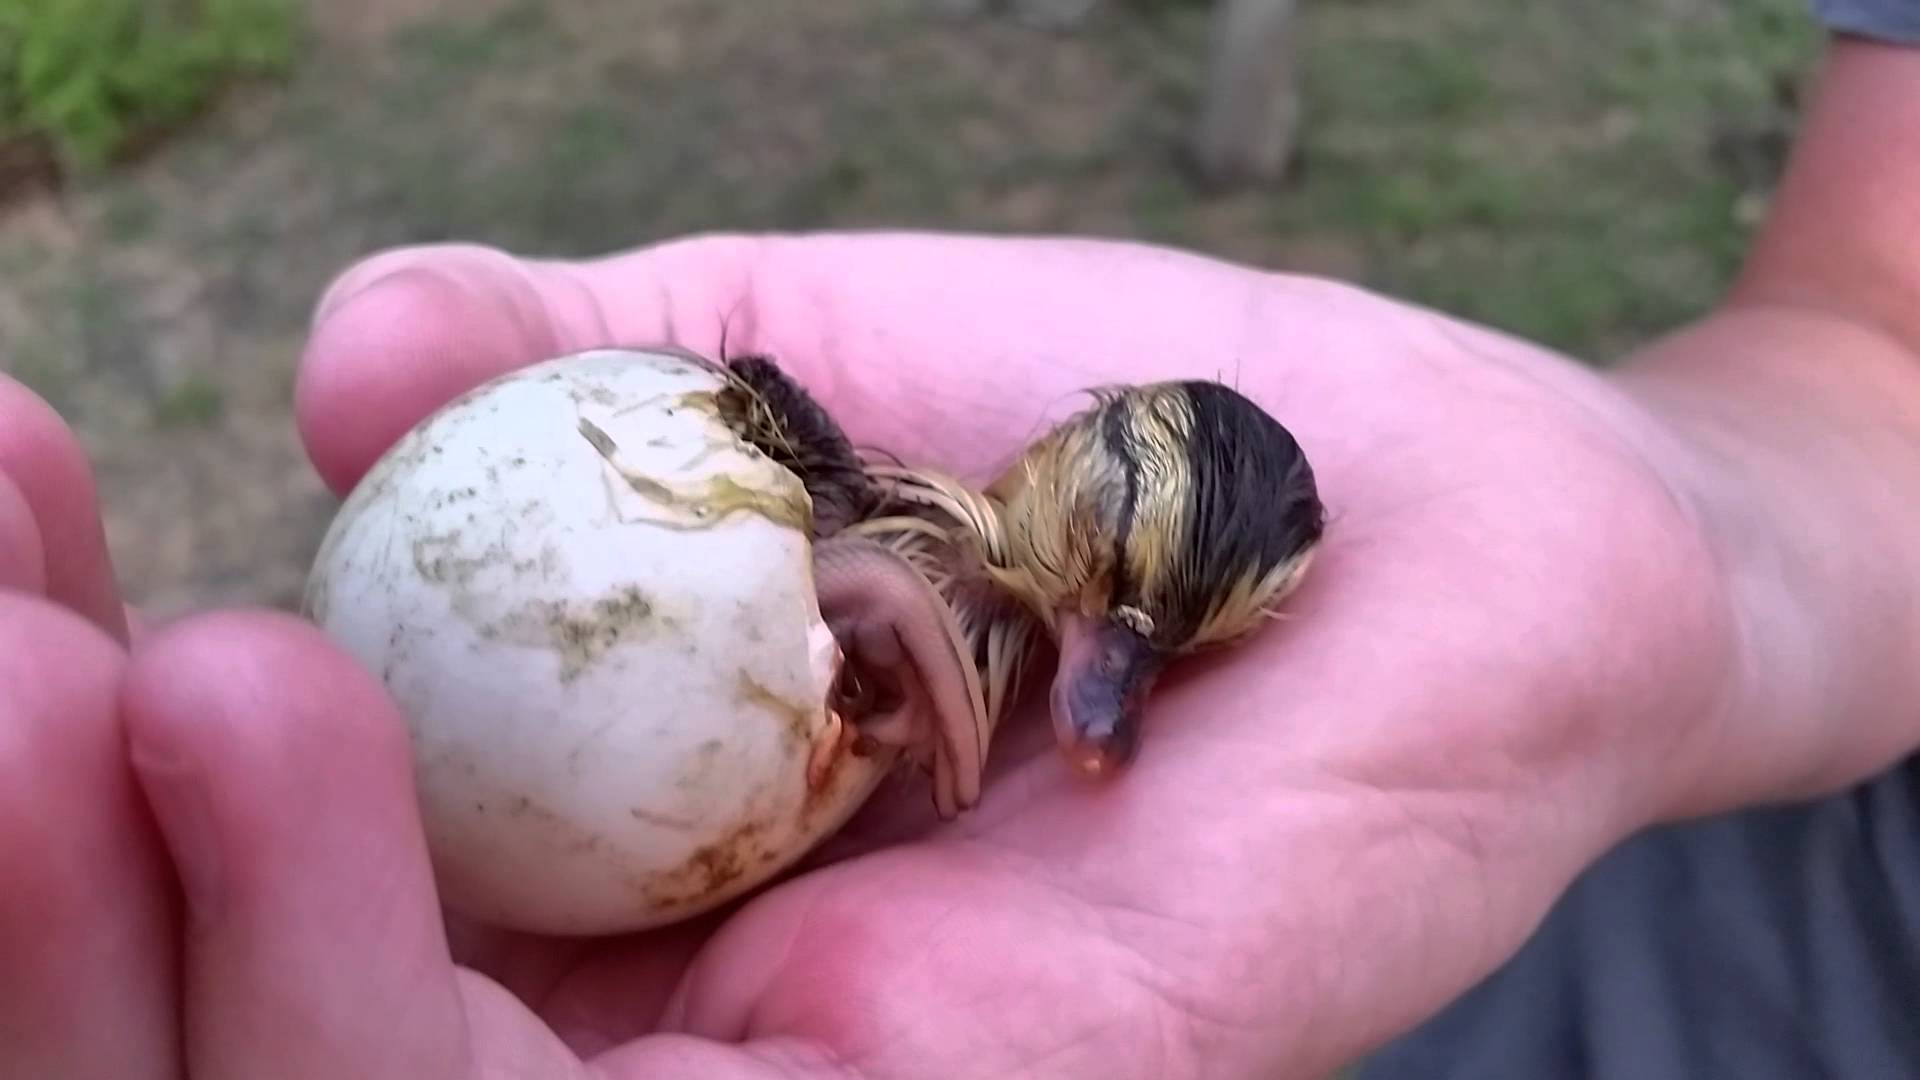 Baby ducks first moments after hatching - YouTube